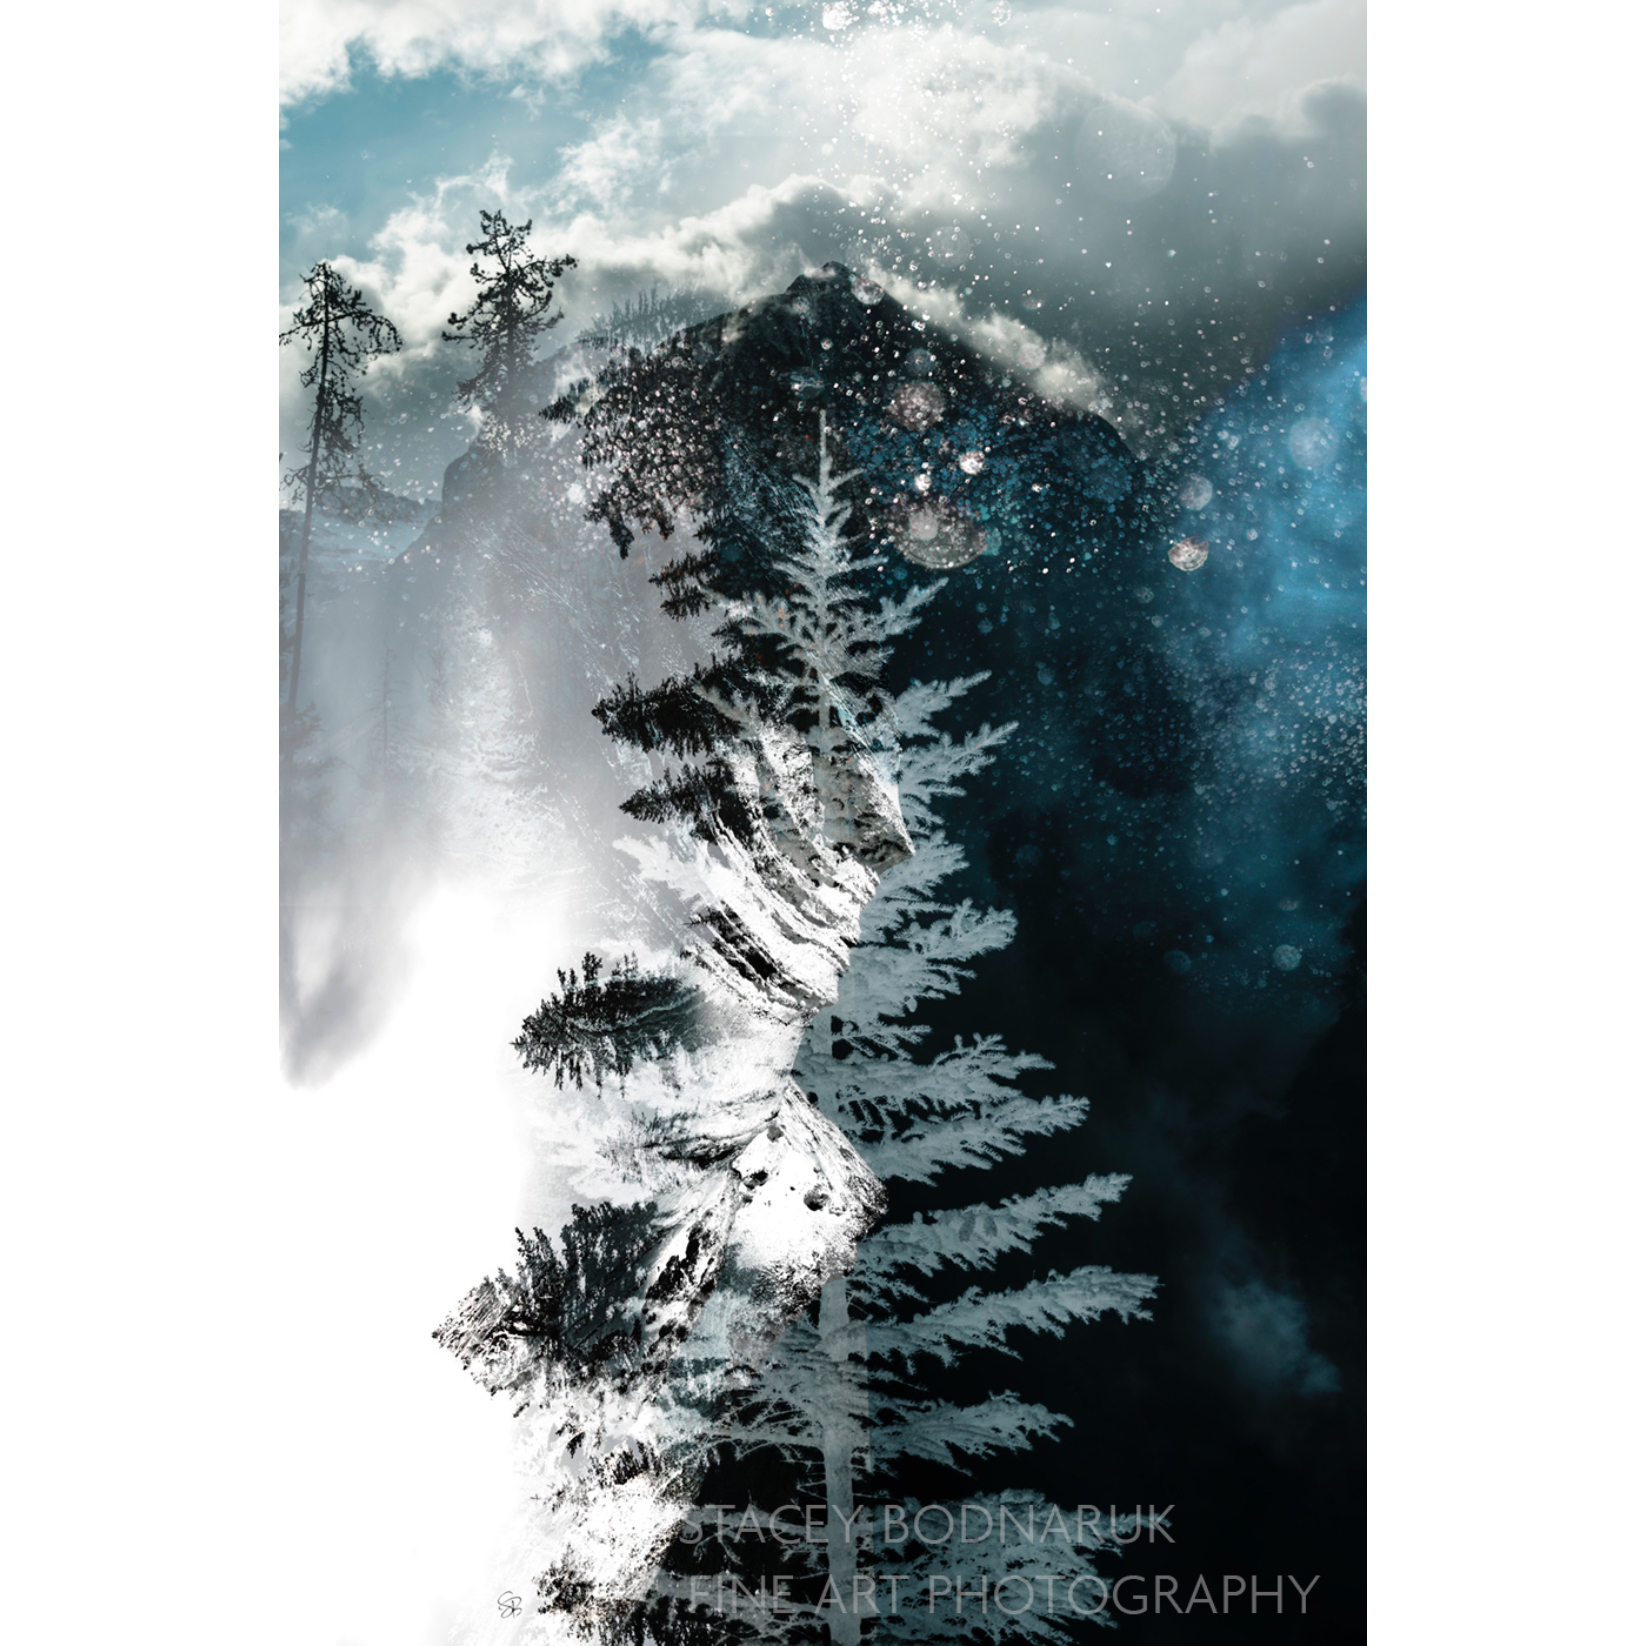 Diamonds in the Sky, composite tree photograph by Stacey Bodnaruk at Effusion Art Gallery in Invermere, BC.